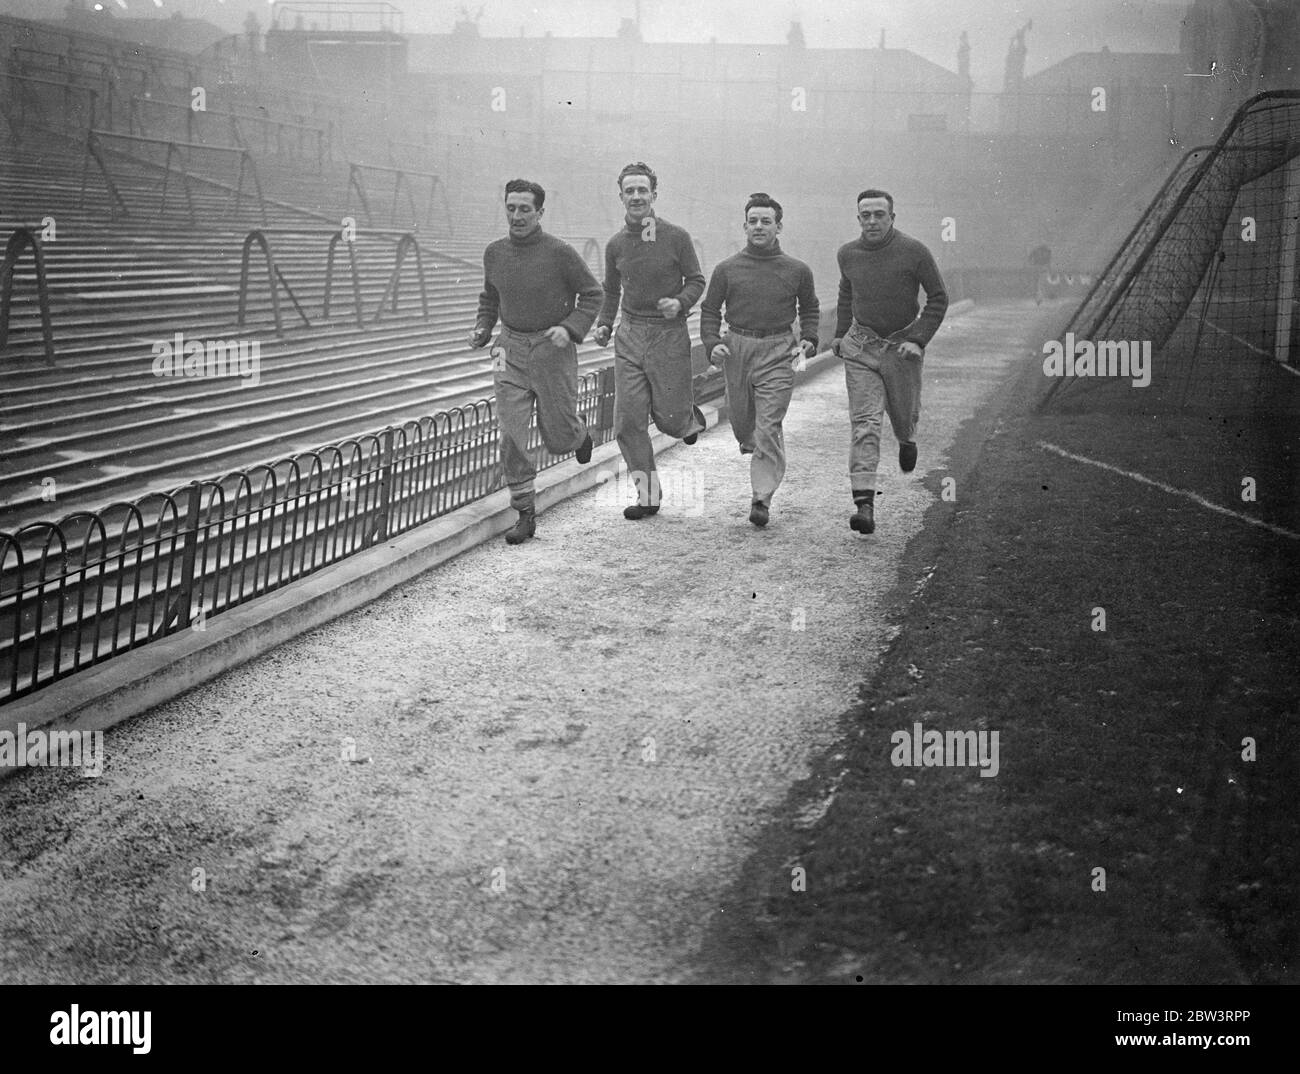 Frost stops Arsenal versus Bolton football match at Highbury . Players give demonstration . Because the ground was frozen and covered with ice the match between Arsenal and Bolton Wanderers at Highbury was cancelled . Instead , Arsenal players gave the crowd a demonstration . Photo shows , Joe Hulme , Frank Hill , Herbie Roberts , and Ray Bowden of Arsenal football club , sprinting round the ground . 21 December 1935 Stock Photo